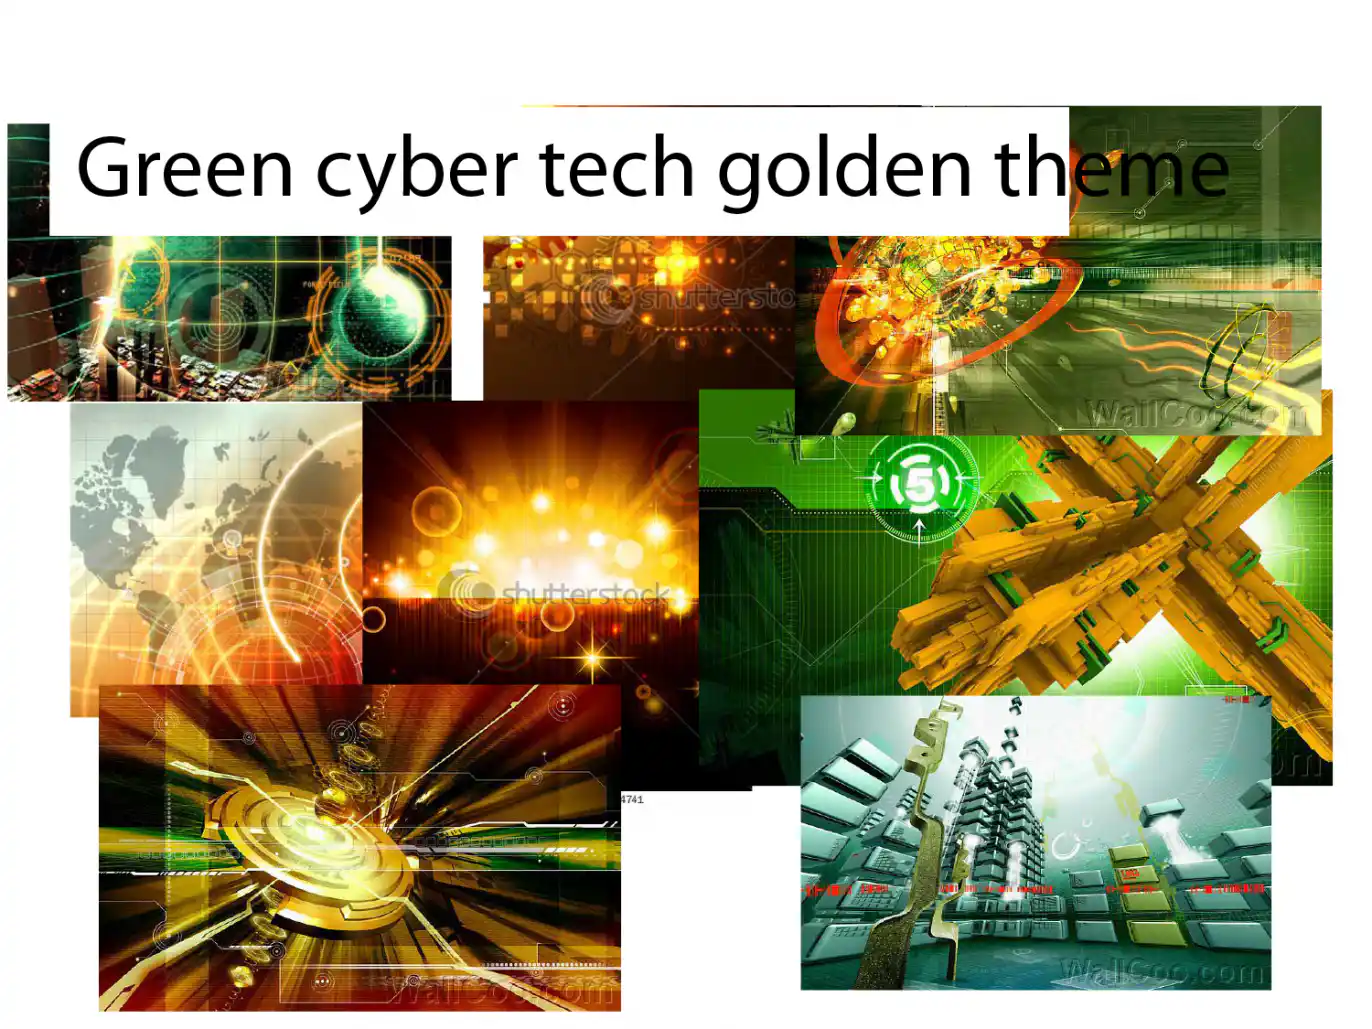 image showing green and gold cyber tech looking images